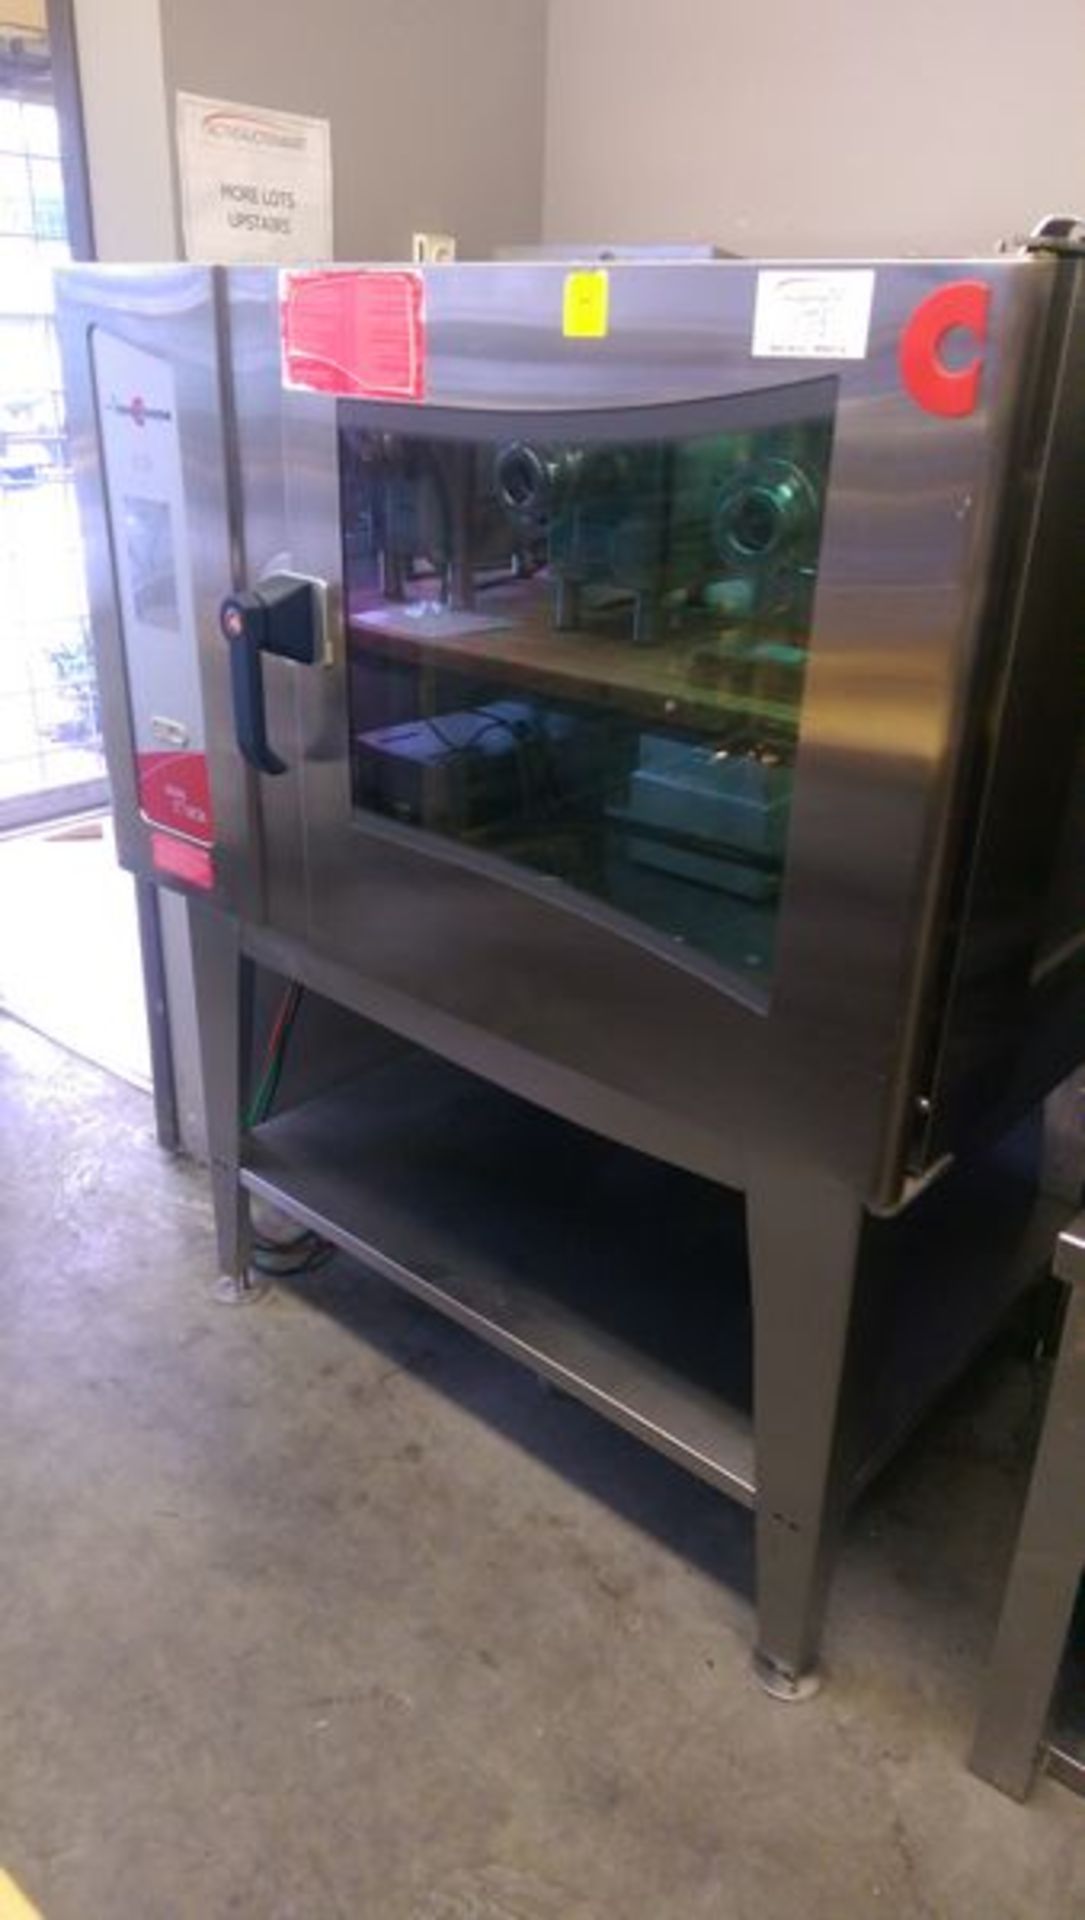 Cleveland ConvoTherm Model OGS-6.20 - Gas Combi Oven- Steamer - Used less than 1 year